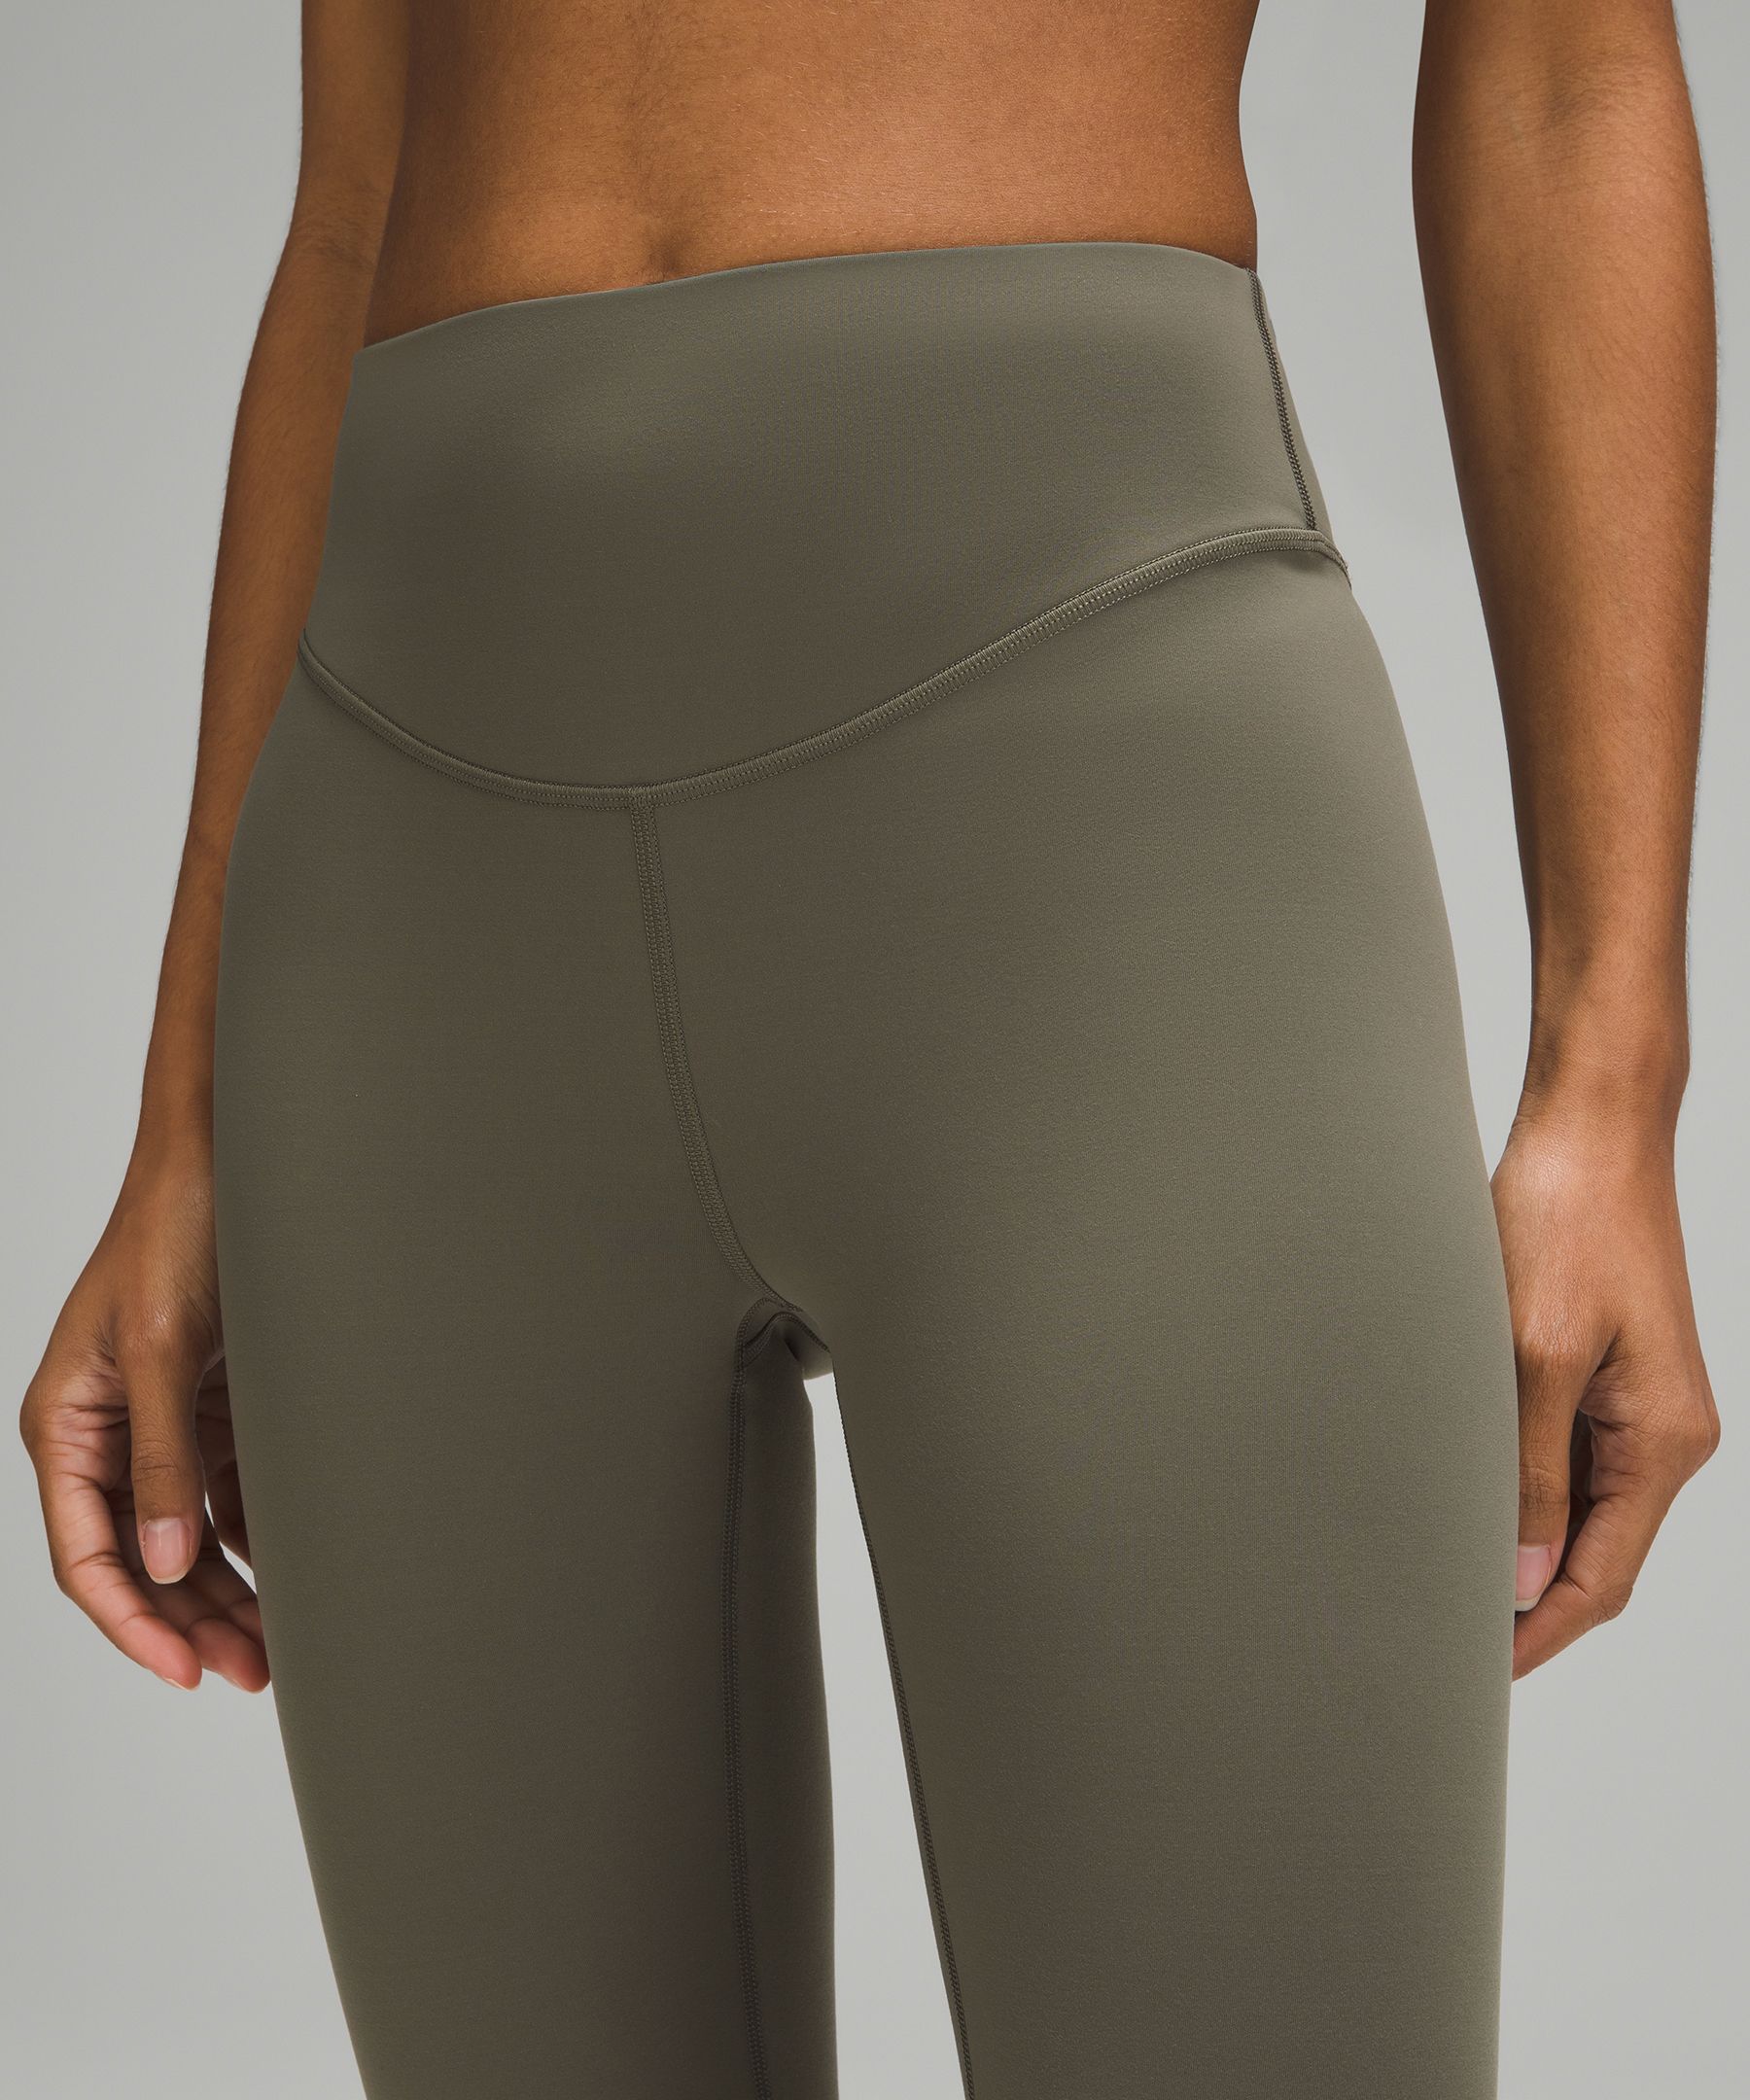 Lululemon athletica Wunder Train High-Rise Tight 25 *Graphic, Women's  Pants